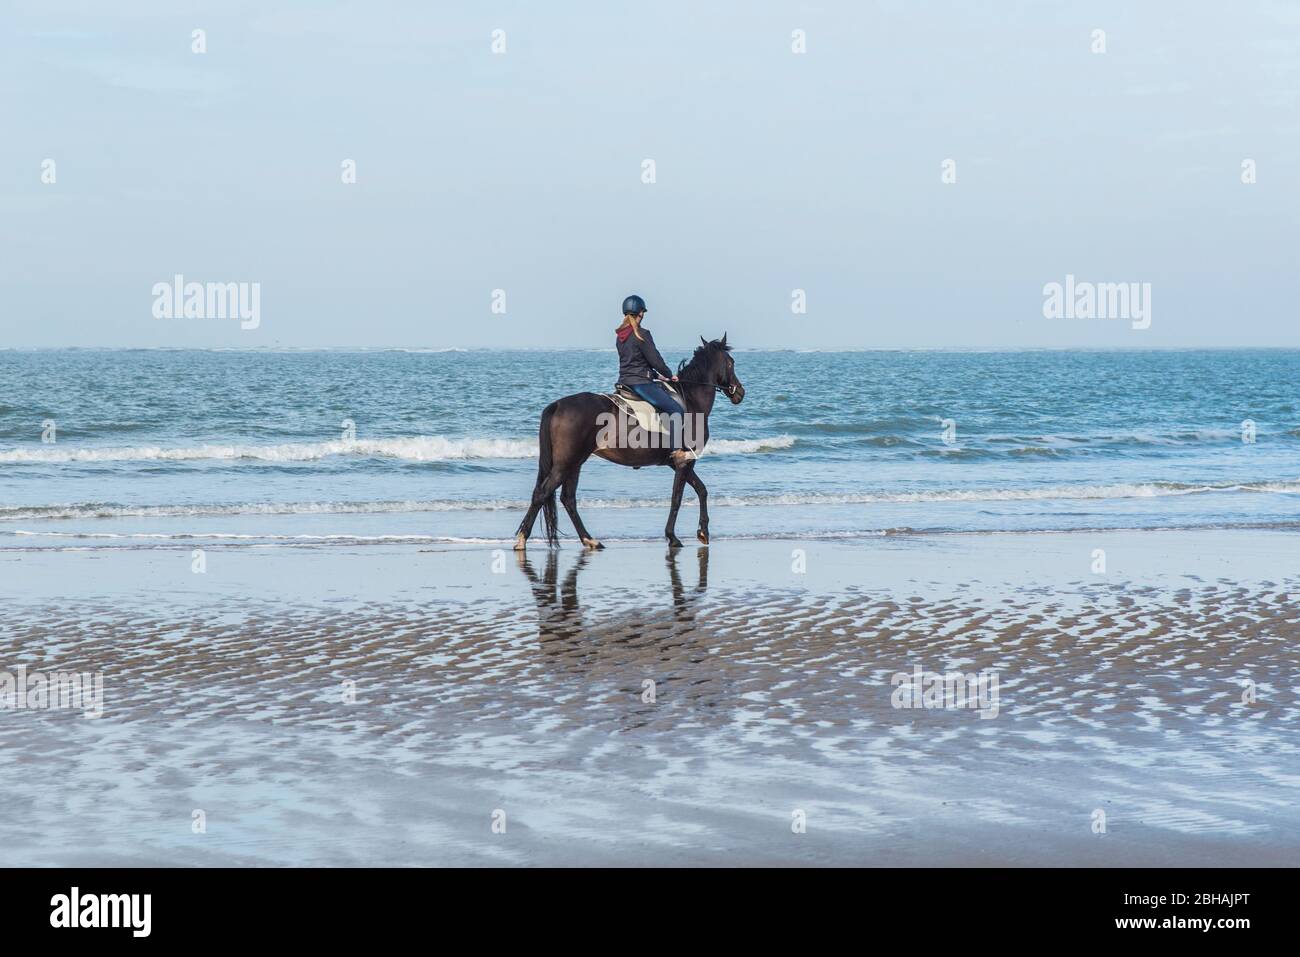 A rider on horseback on the North Sea beach near Renesse, The Netherlands. Stock Photo